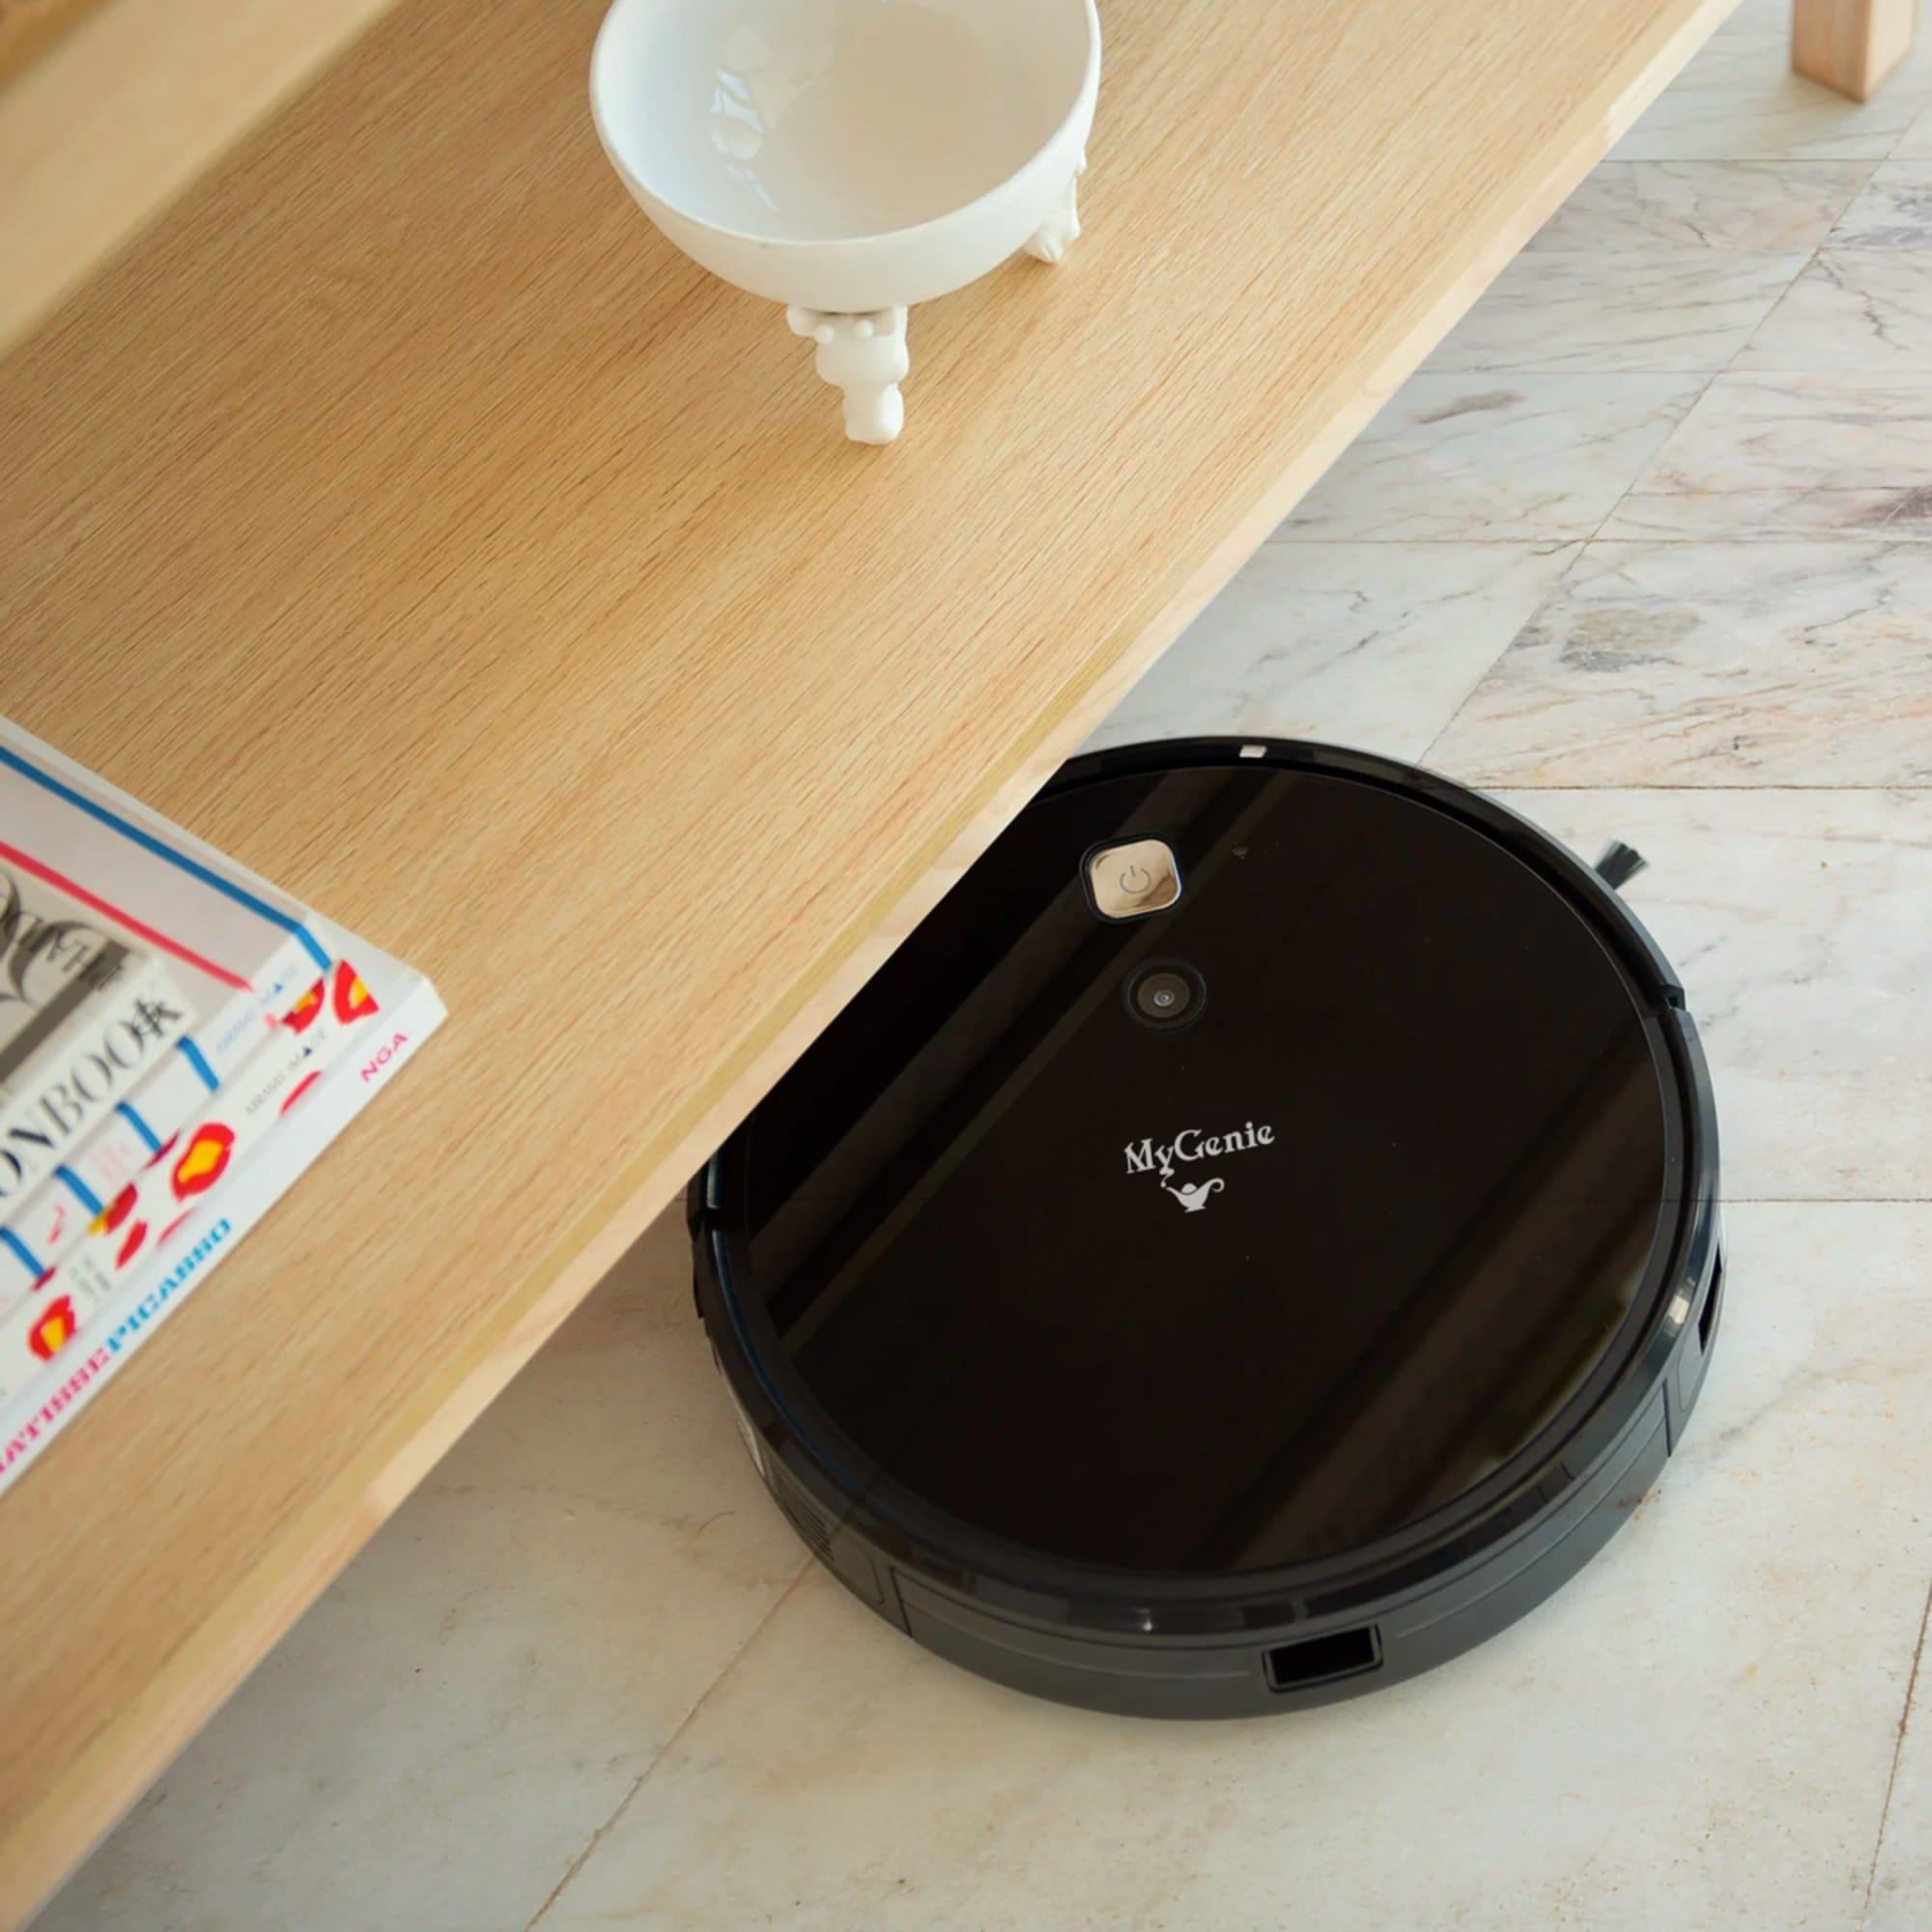 MyGenie V-Max 3000 Robotic Vacuum Cleaner with Wi-Fi Black Image 3